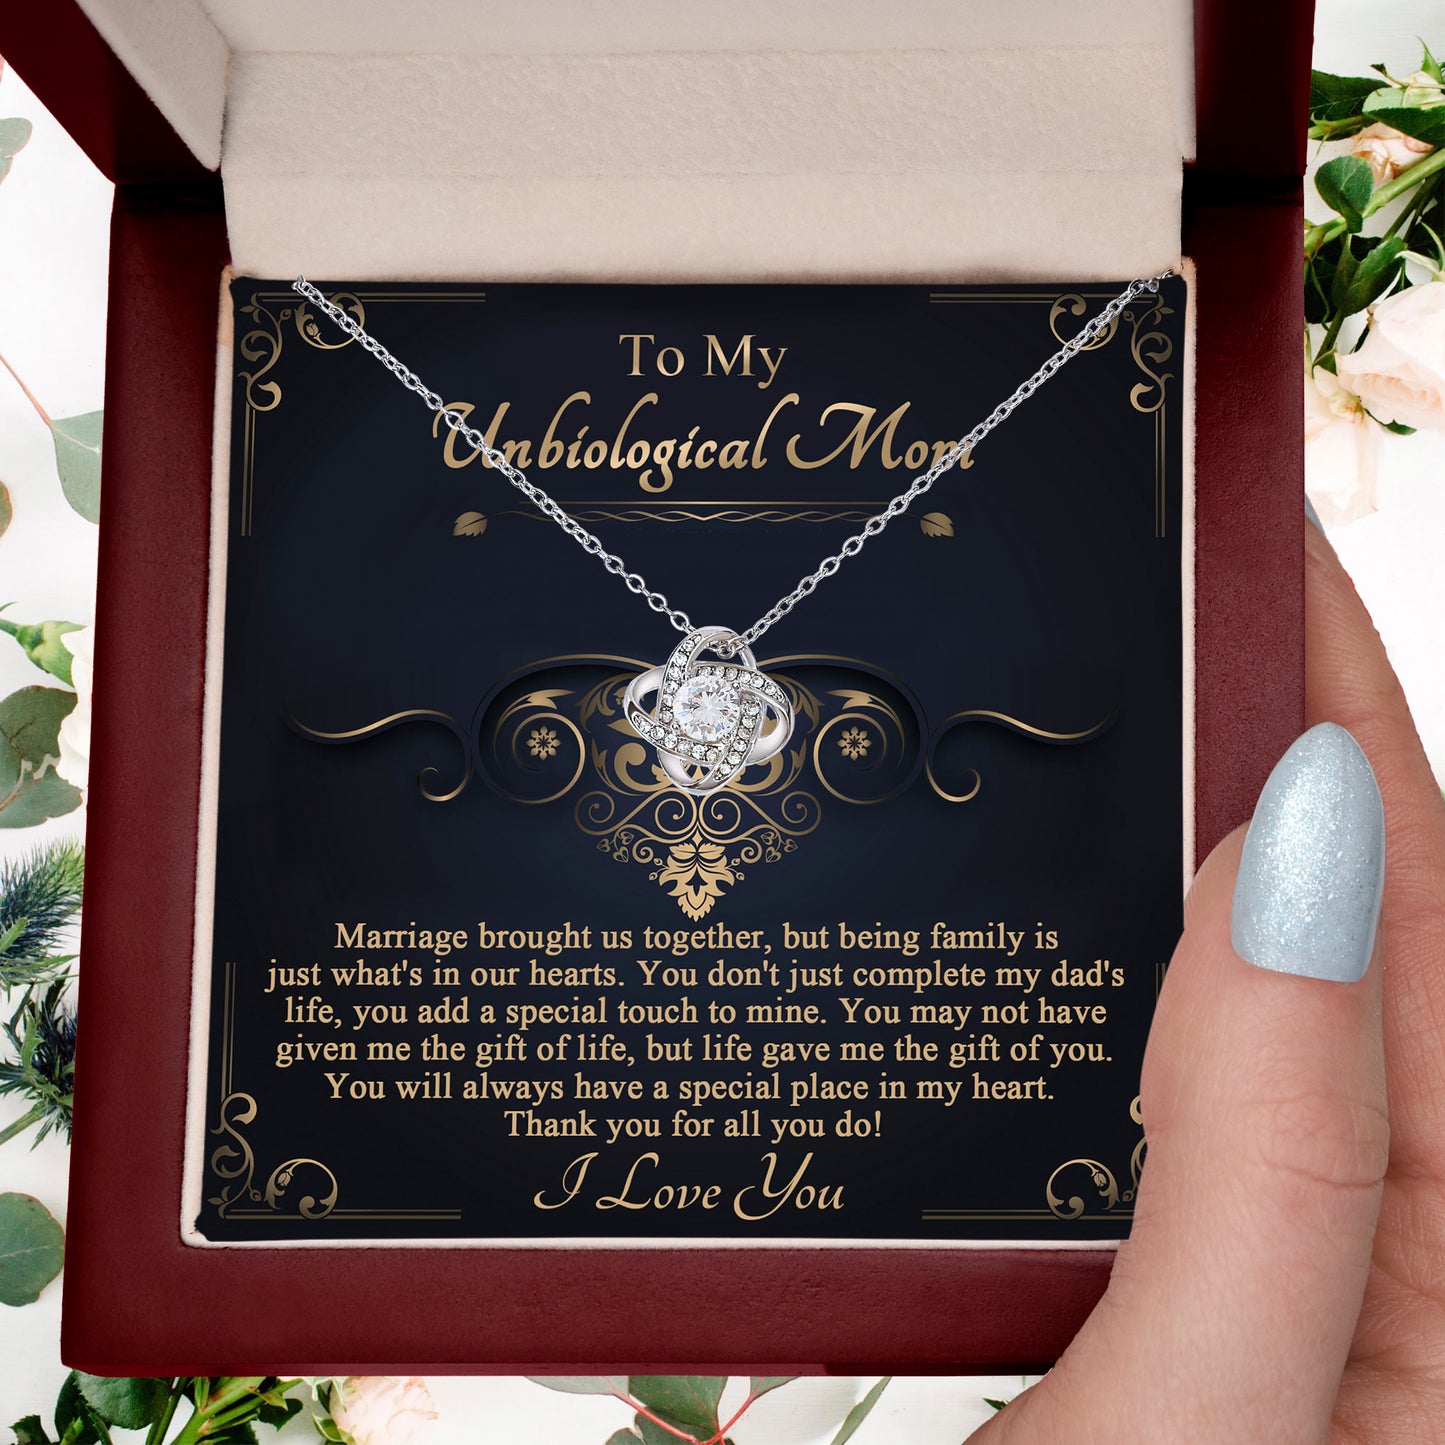 Gift for Unbiological Mother You Complete my Dad's Life Love Knot Pendant Necklace